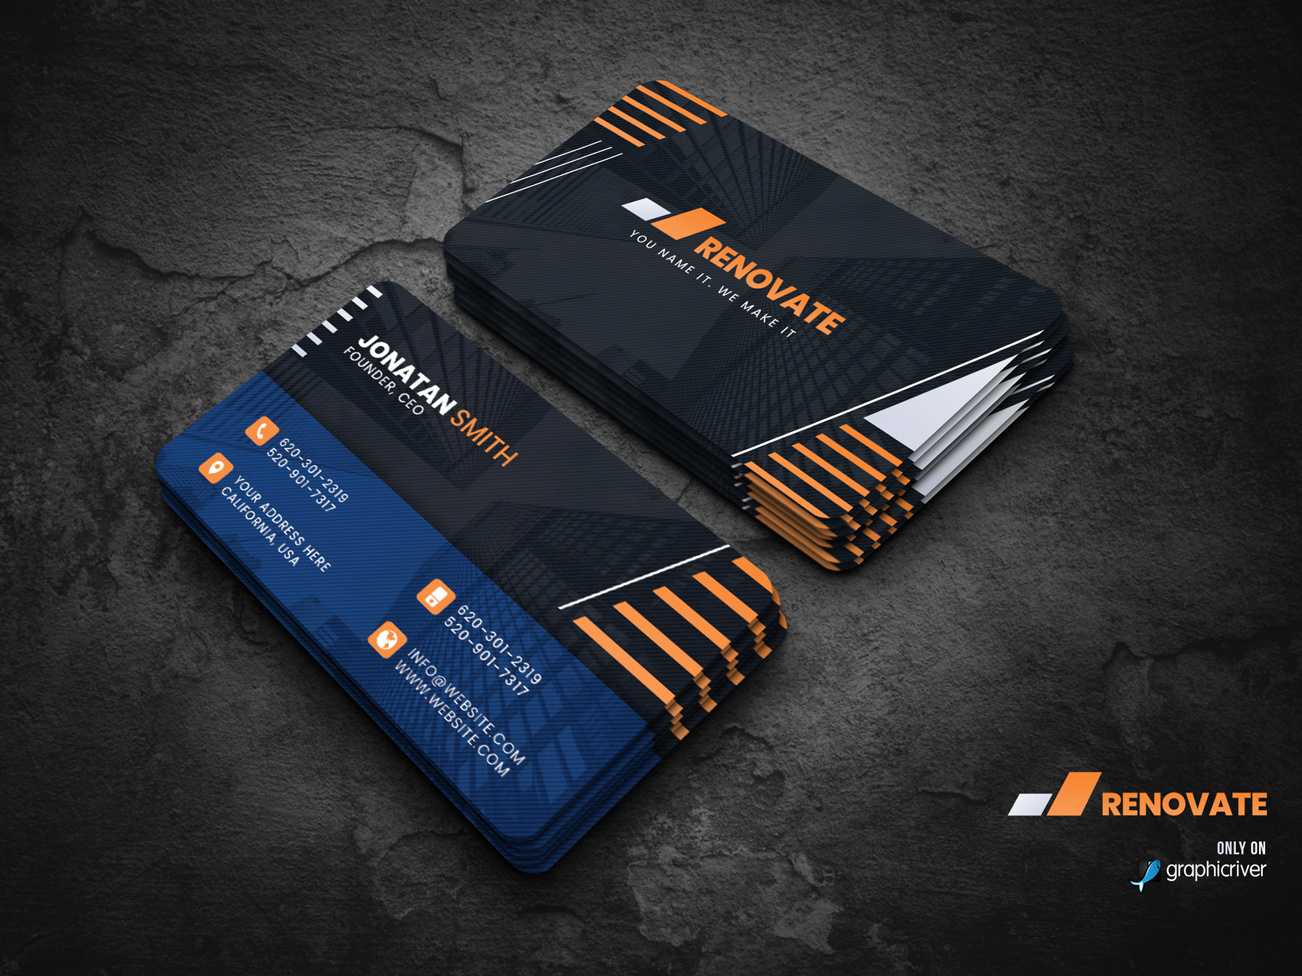 Business Card Templatedalibor Stankovic On Dribbble Throughout Name Card Template Photoshop